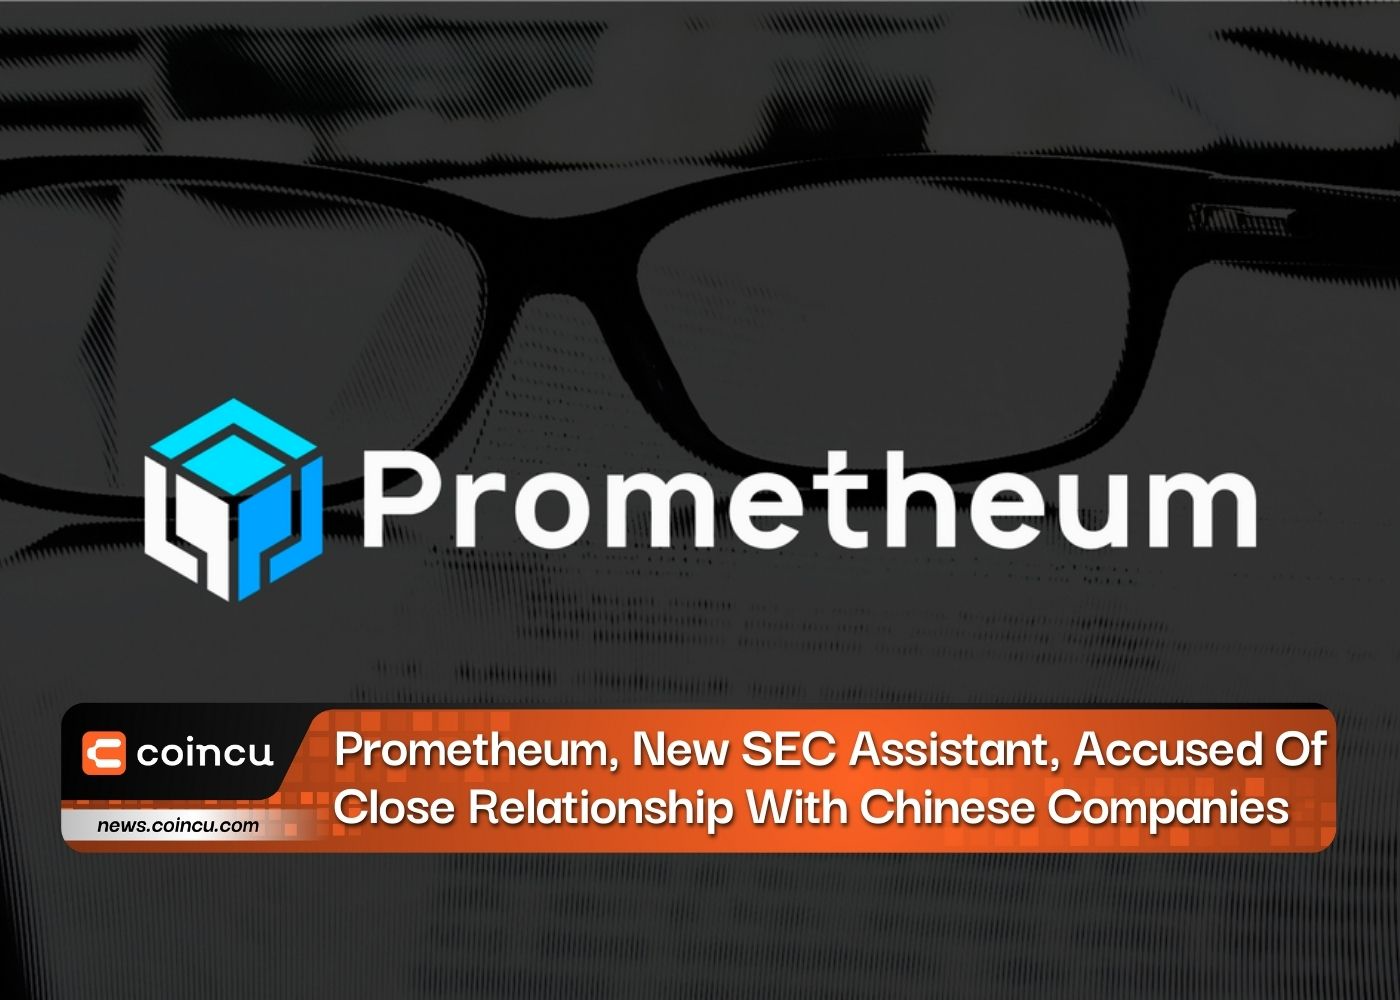 New SEC Assistant Prometheum Accused Of Close Relationship With Chinese Companies